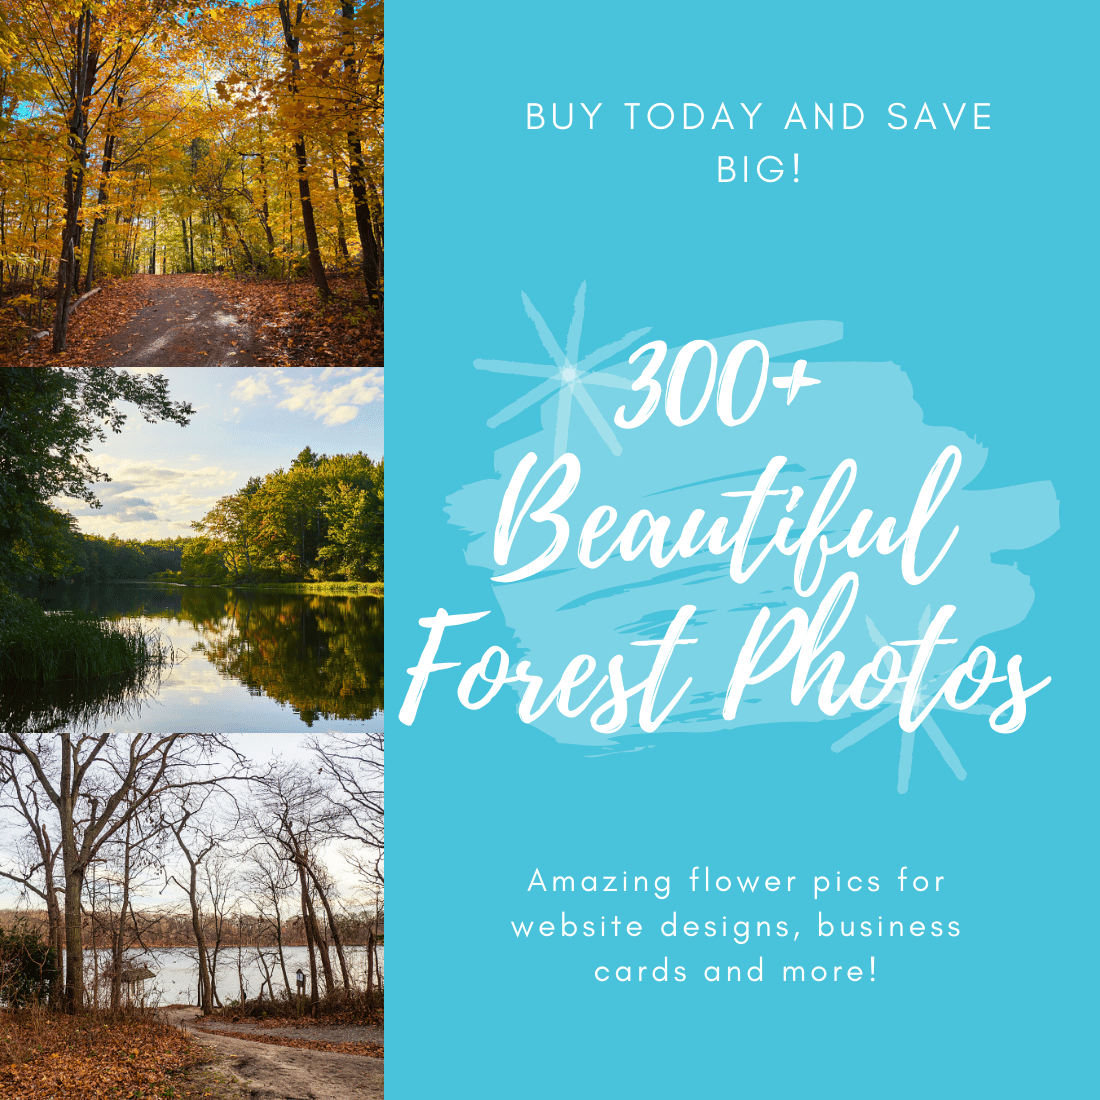 300 Plus Beautiful Forest Photos Cover Image.